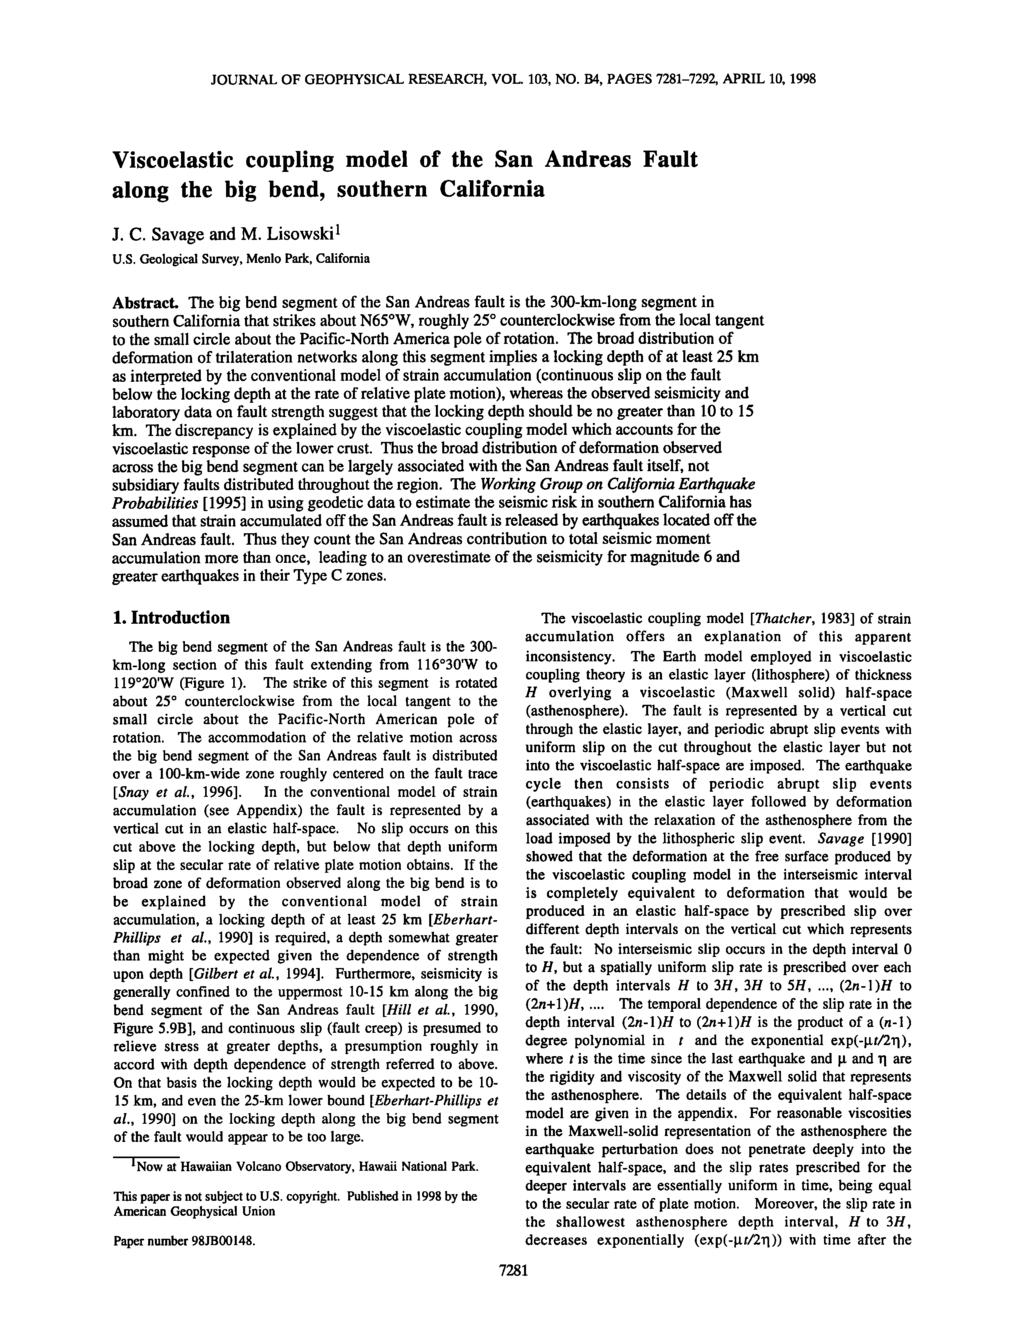 JOURNAL OF GEOPHYSICAL RESEARCH, VOL. 103, NO. B4, PAGES 7281-7292, APRIL 10, 1998 Viscoelastic coupling model of the San Andreas Fault along the big bend, southern California J. C. Savage and M.